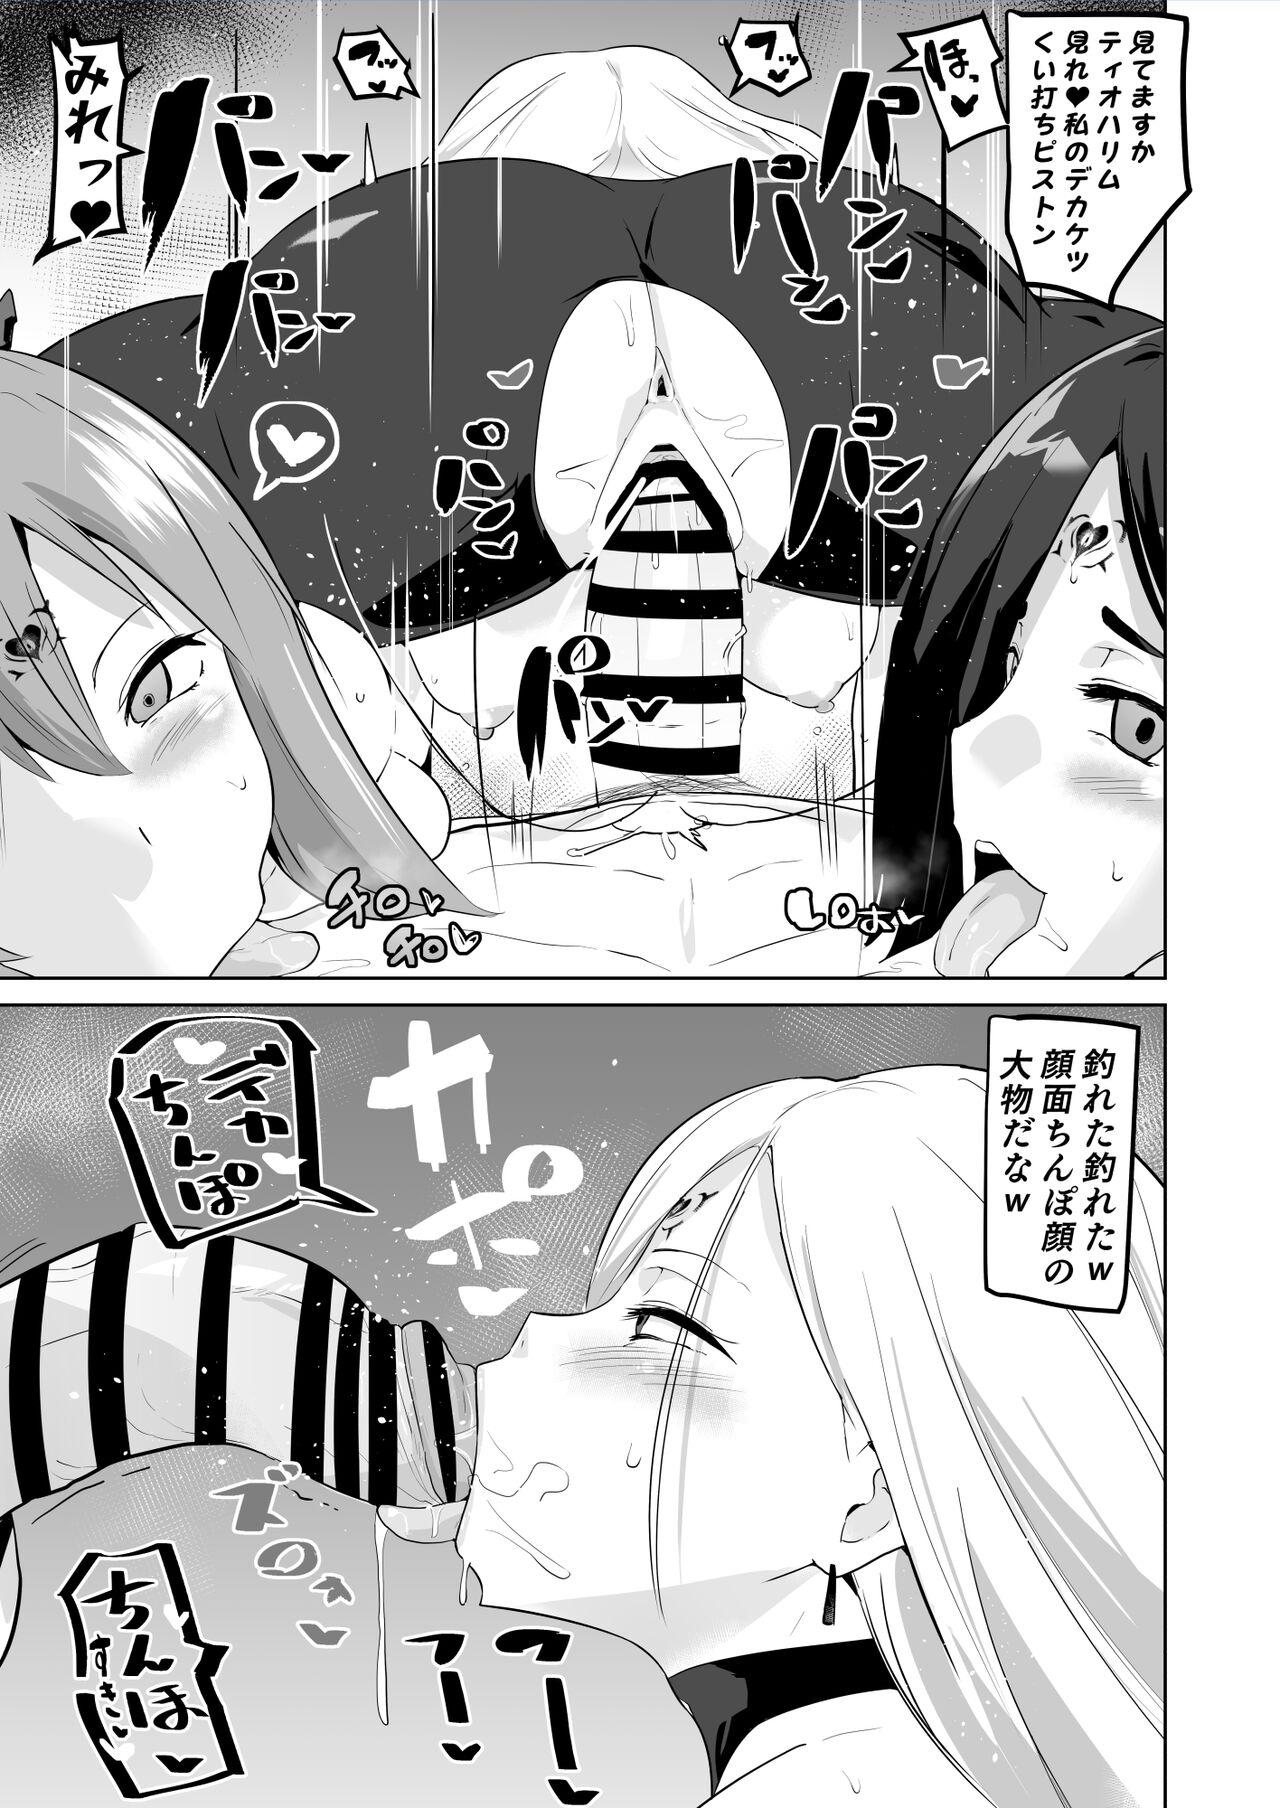 Tugging アライズカルト洗脳 - Tales of arise Gay Cut - Page 4